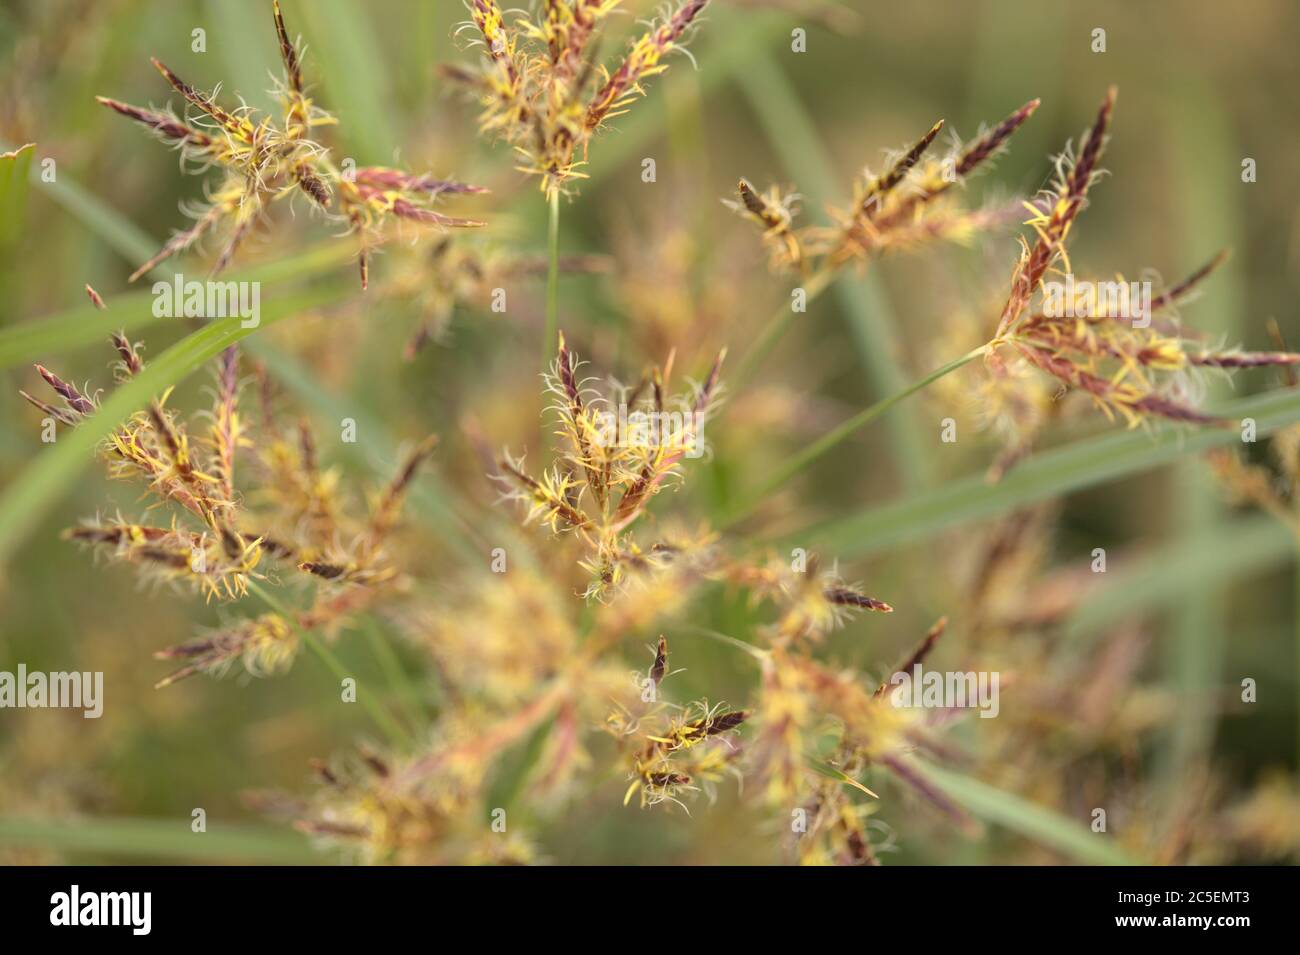 Macro floral background with sedge grasses Stock Photo